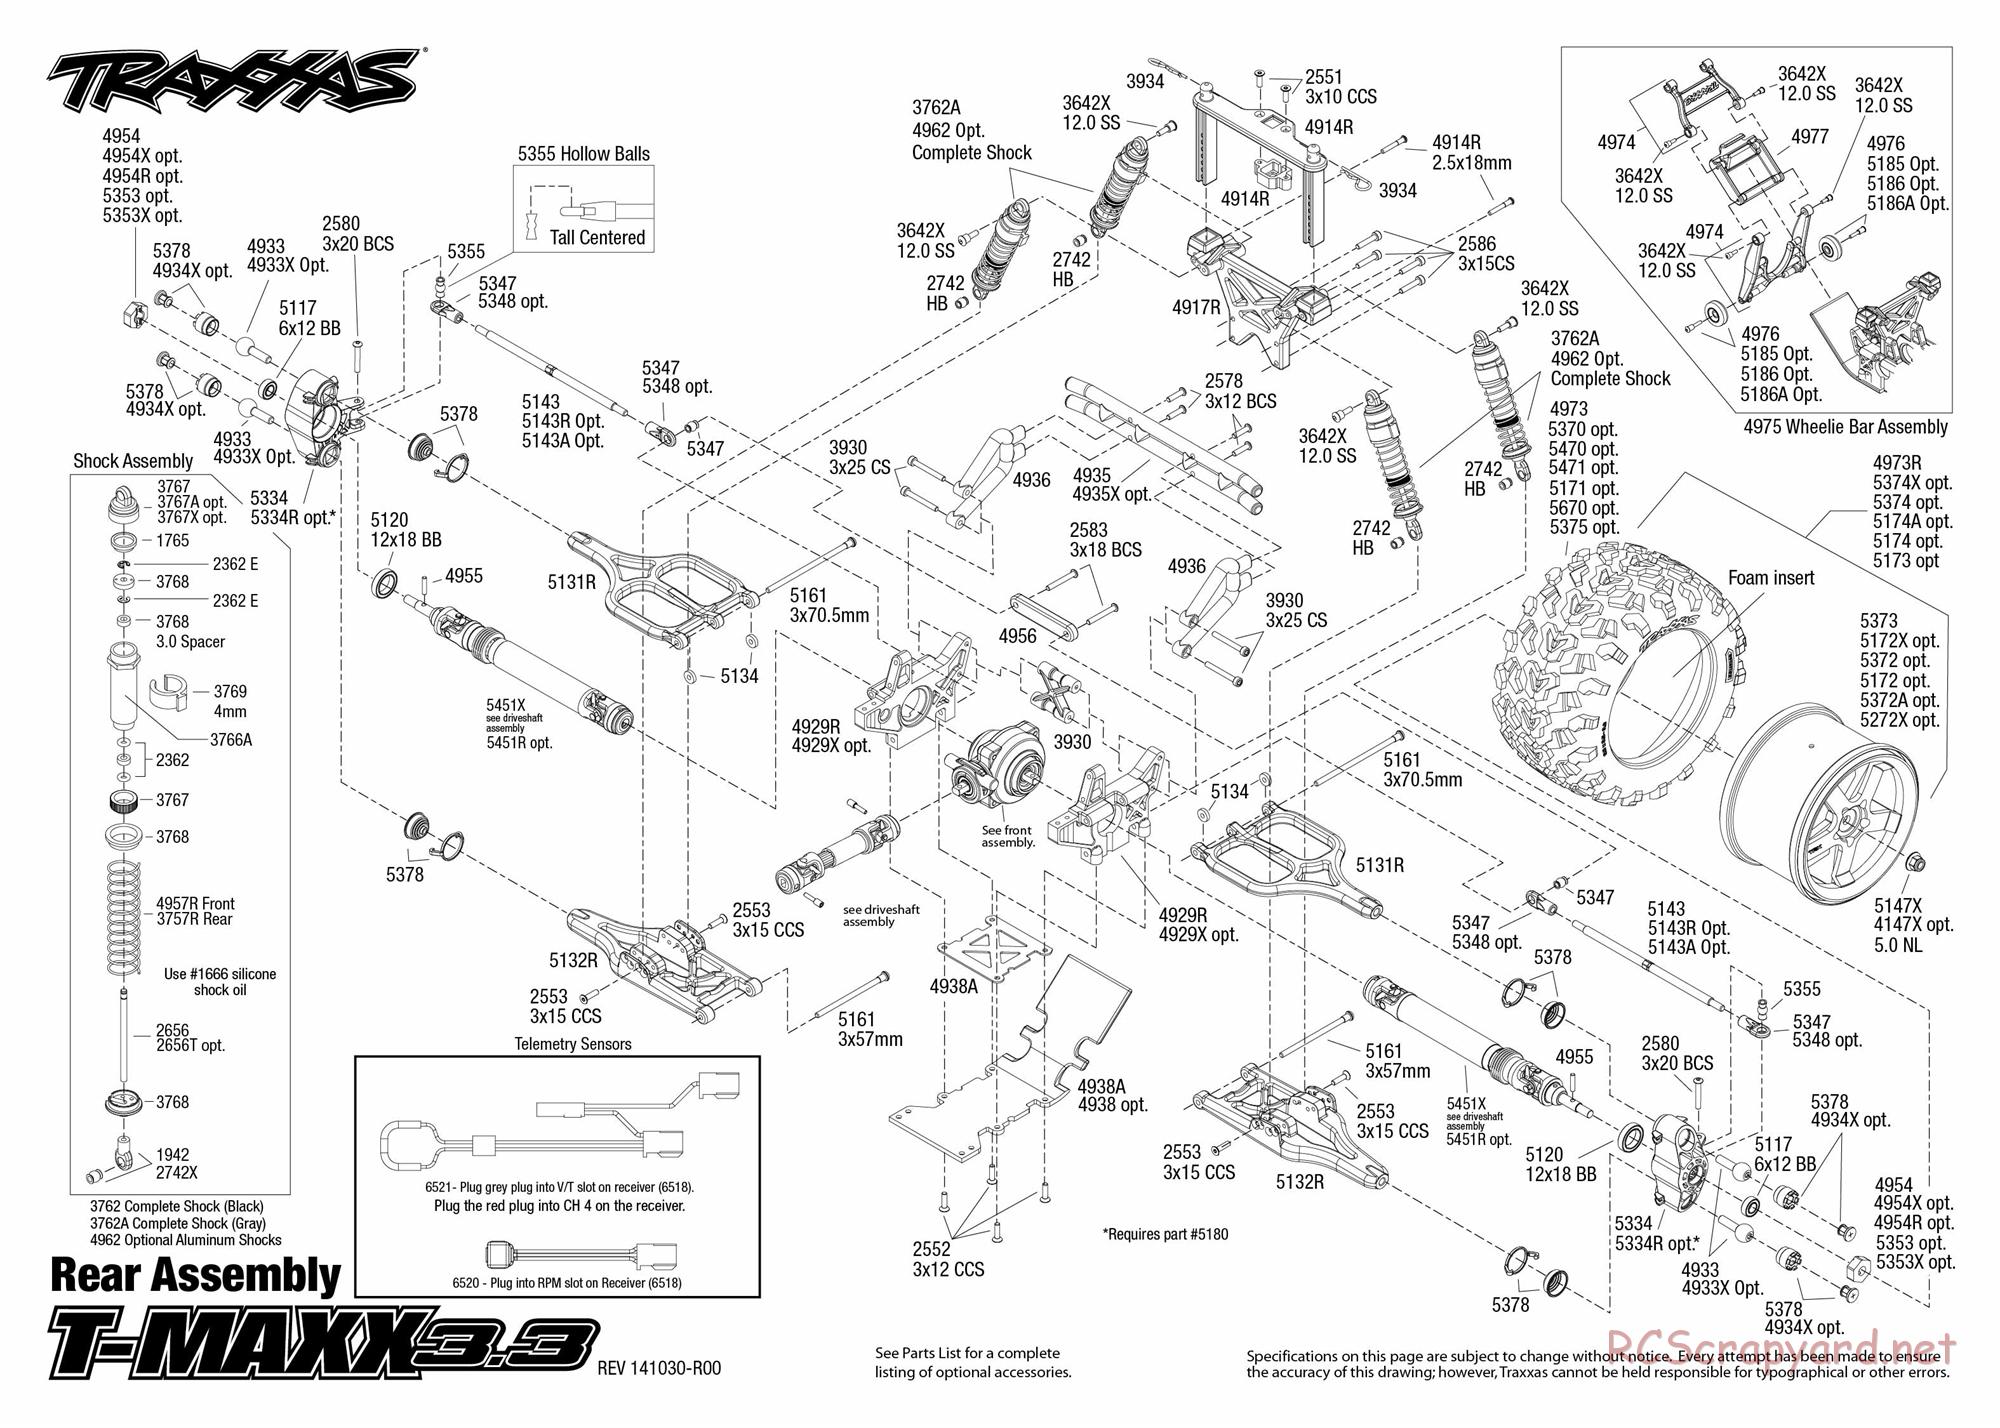 Traxxas - T-Maxx 3.3 (2015) - Exploded Views - Page 4